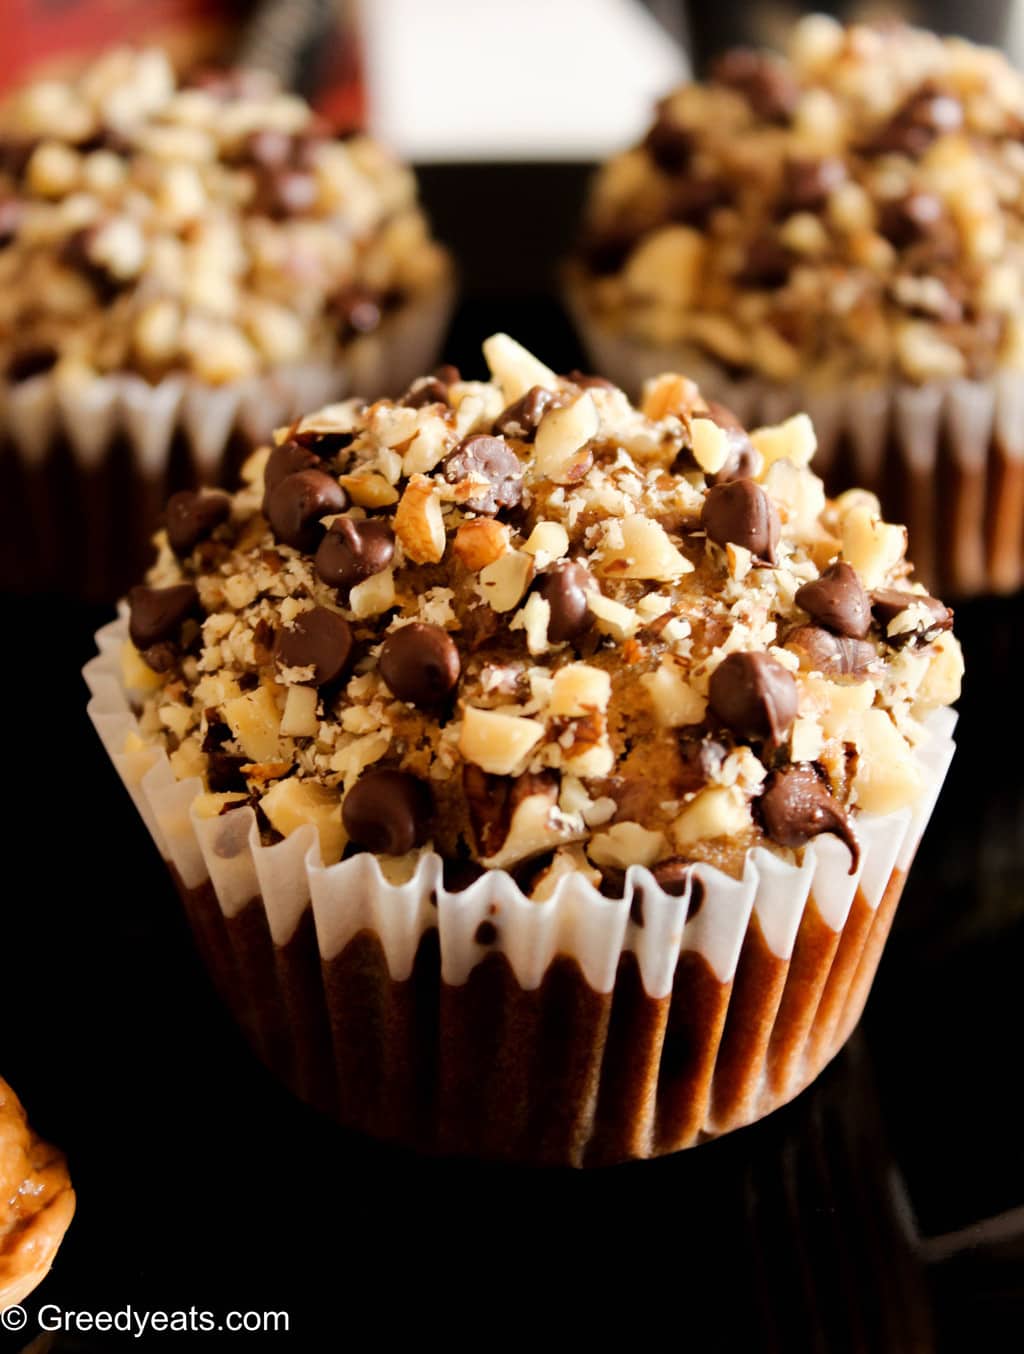 Whole wheat coffee muffins with walnuts and chocolate chips in a muffin liner.